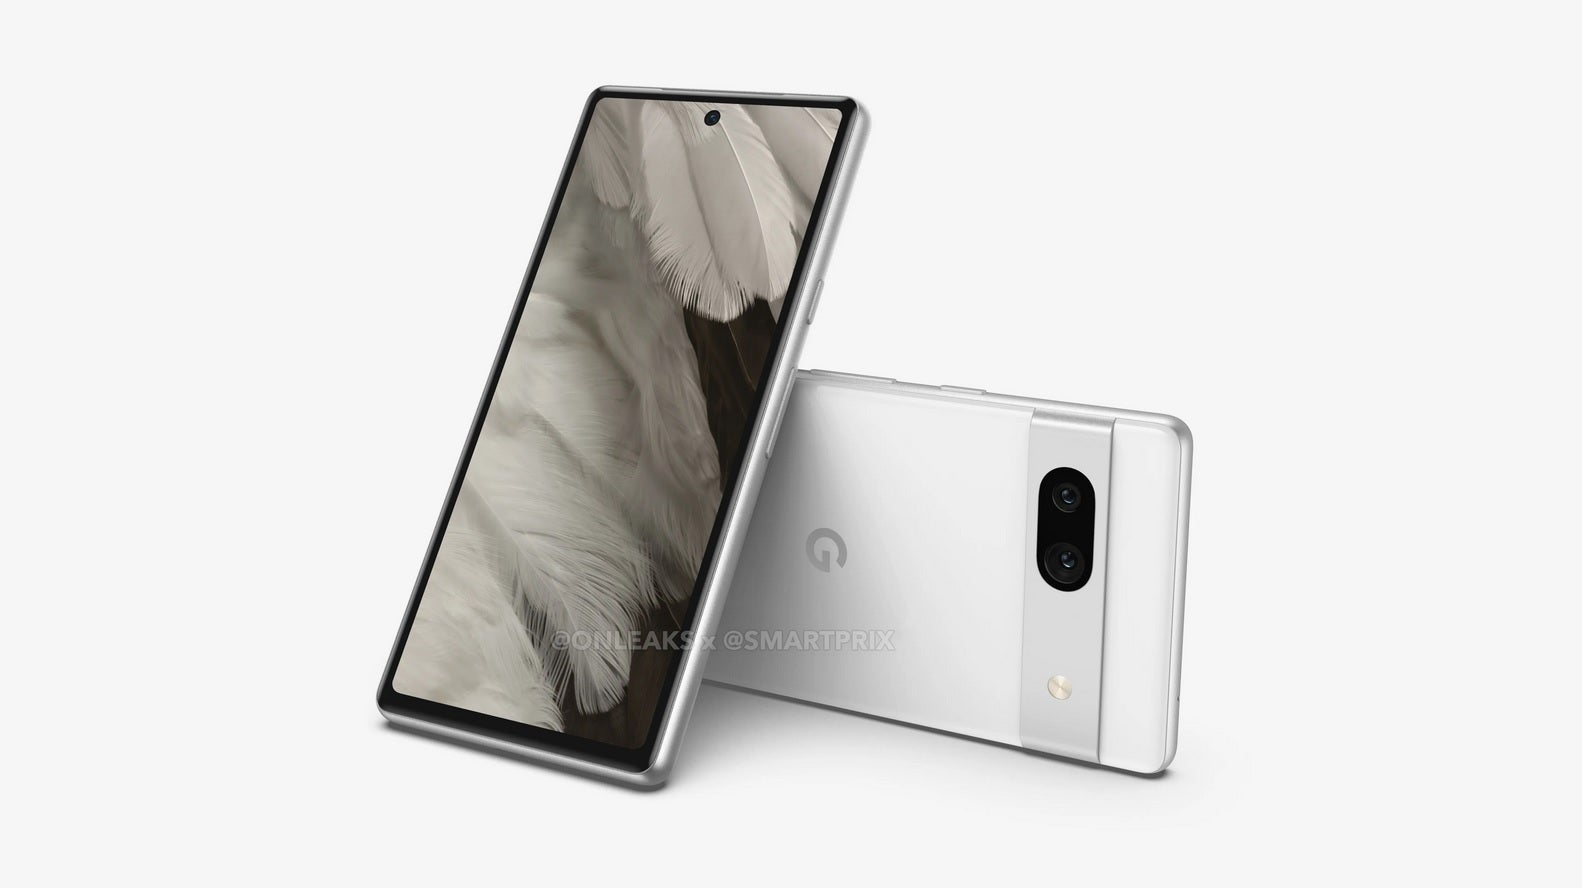 Render of the Pixel 7a - Here's our first look at Google's 2023 mid-ranger, the Pixel 7a